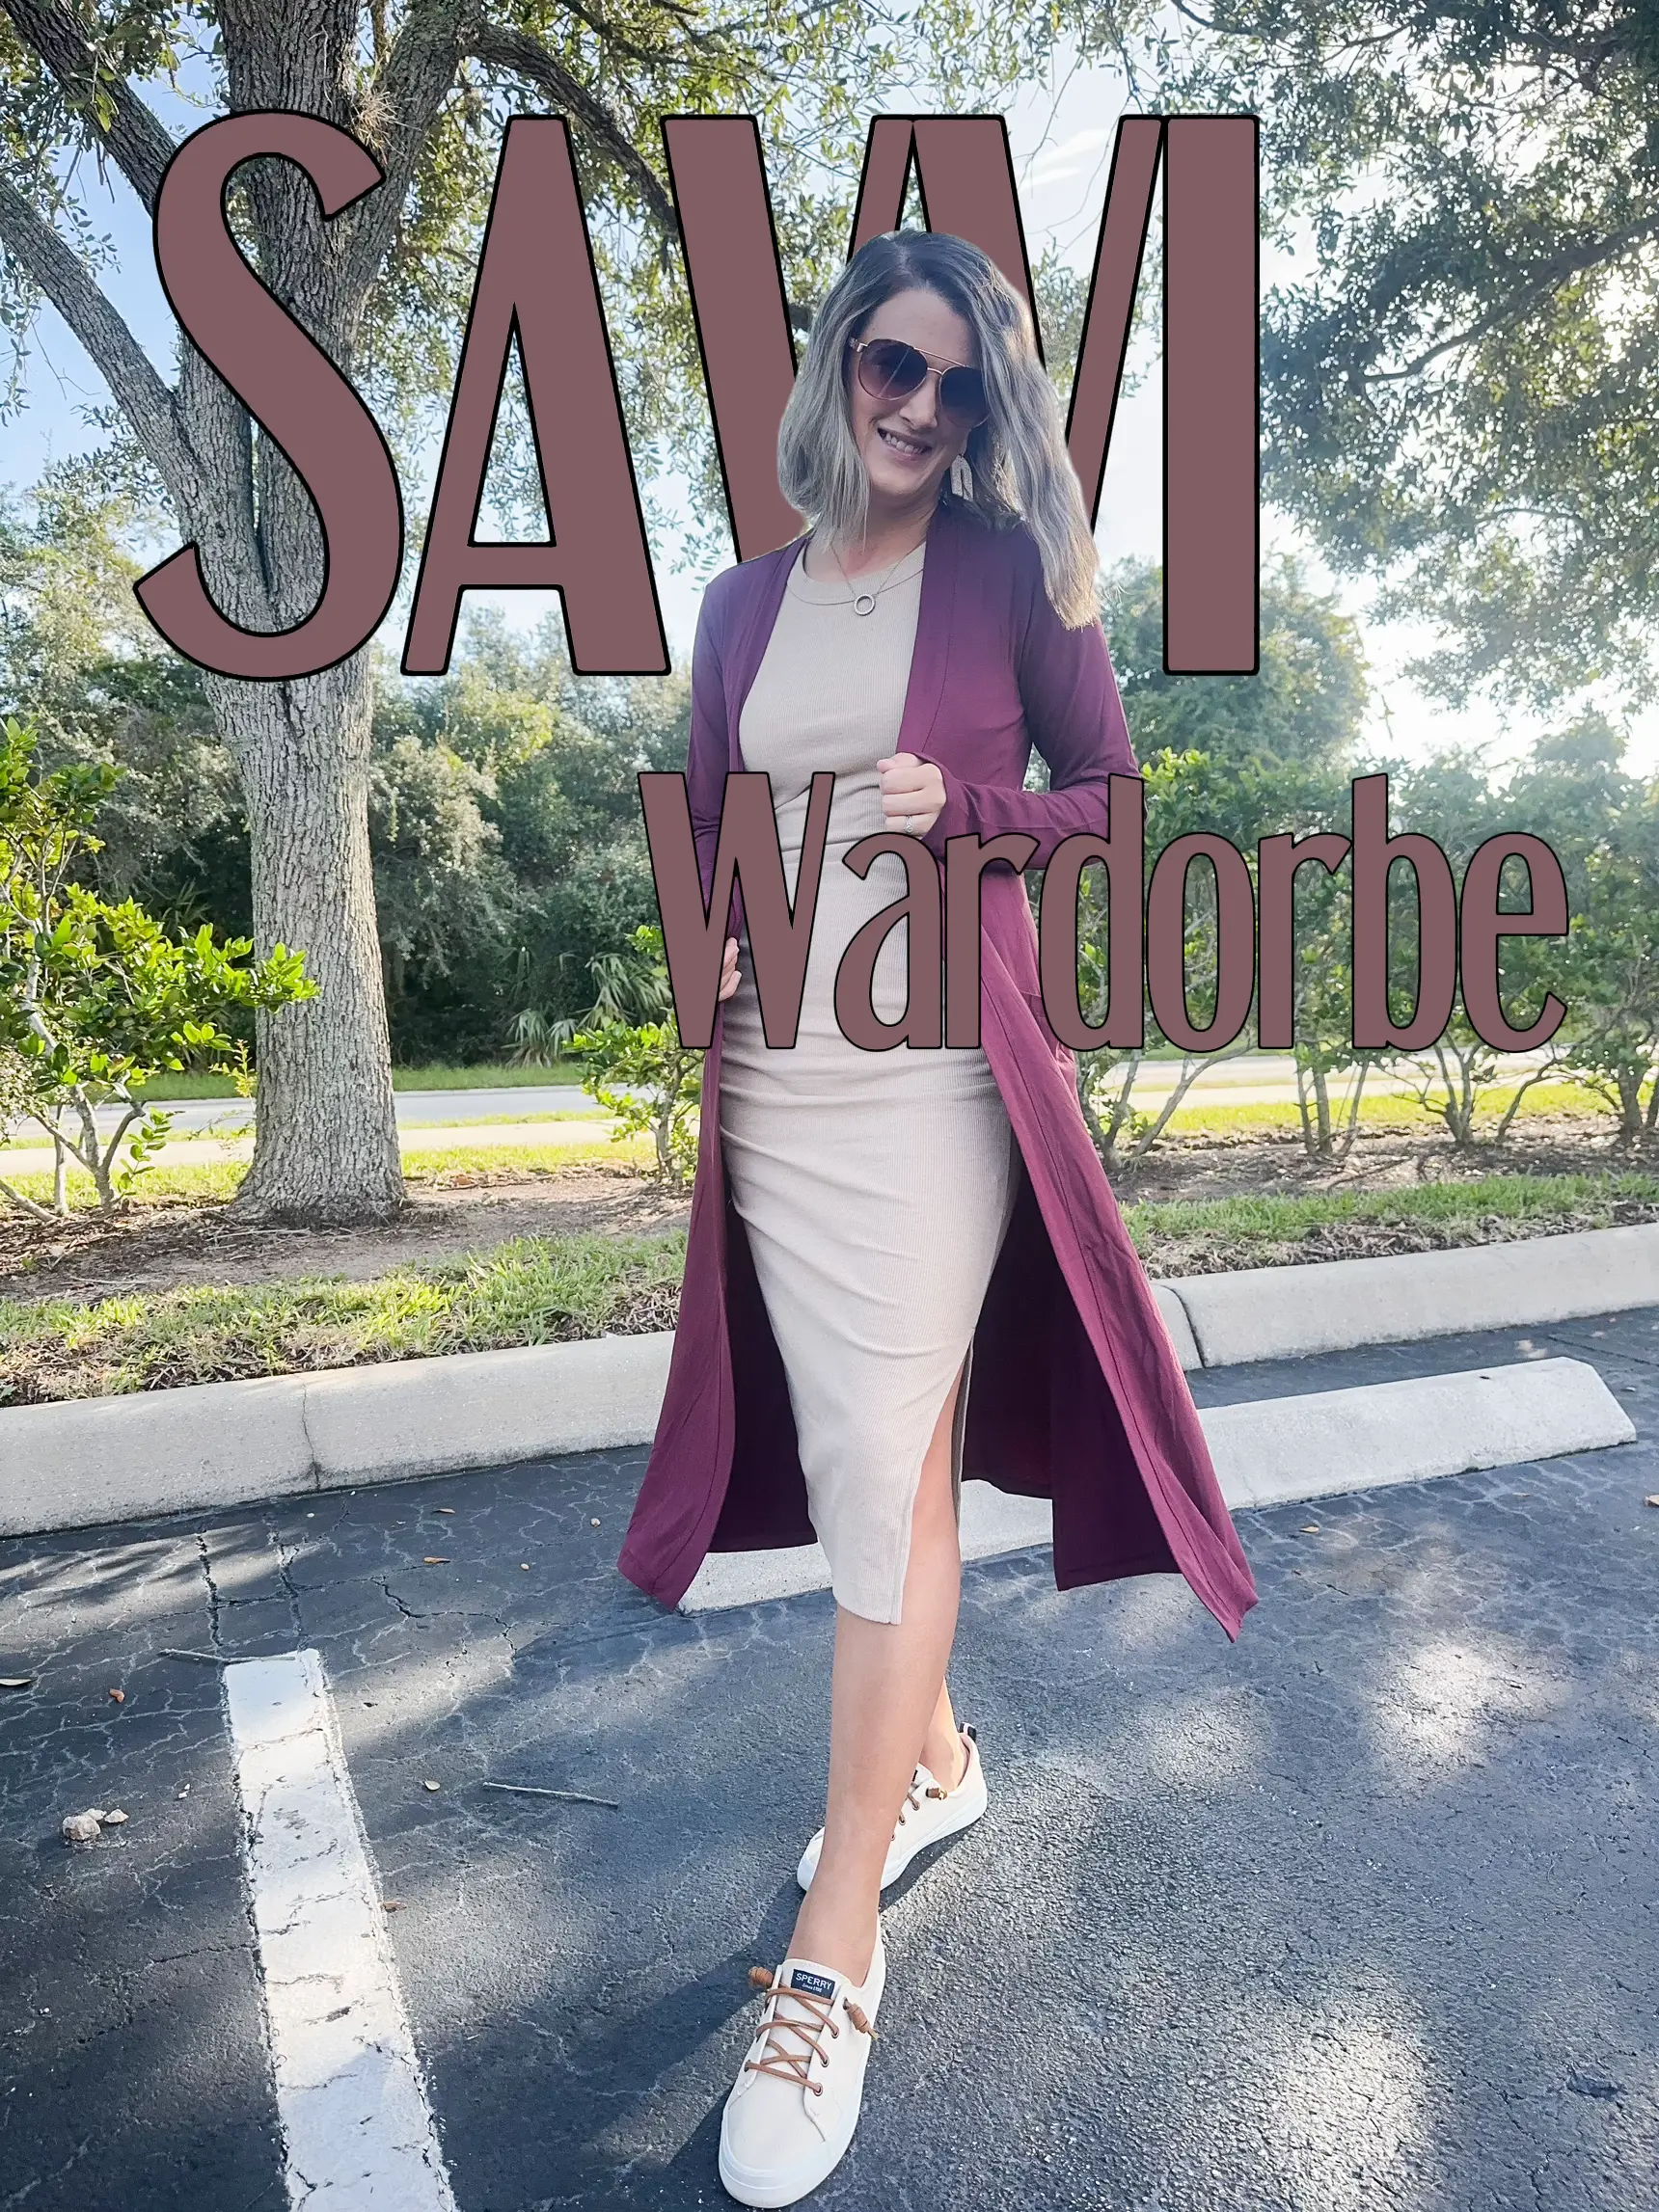 Style Your World with Savvi!